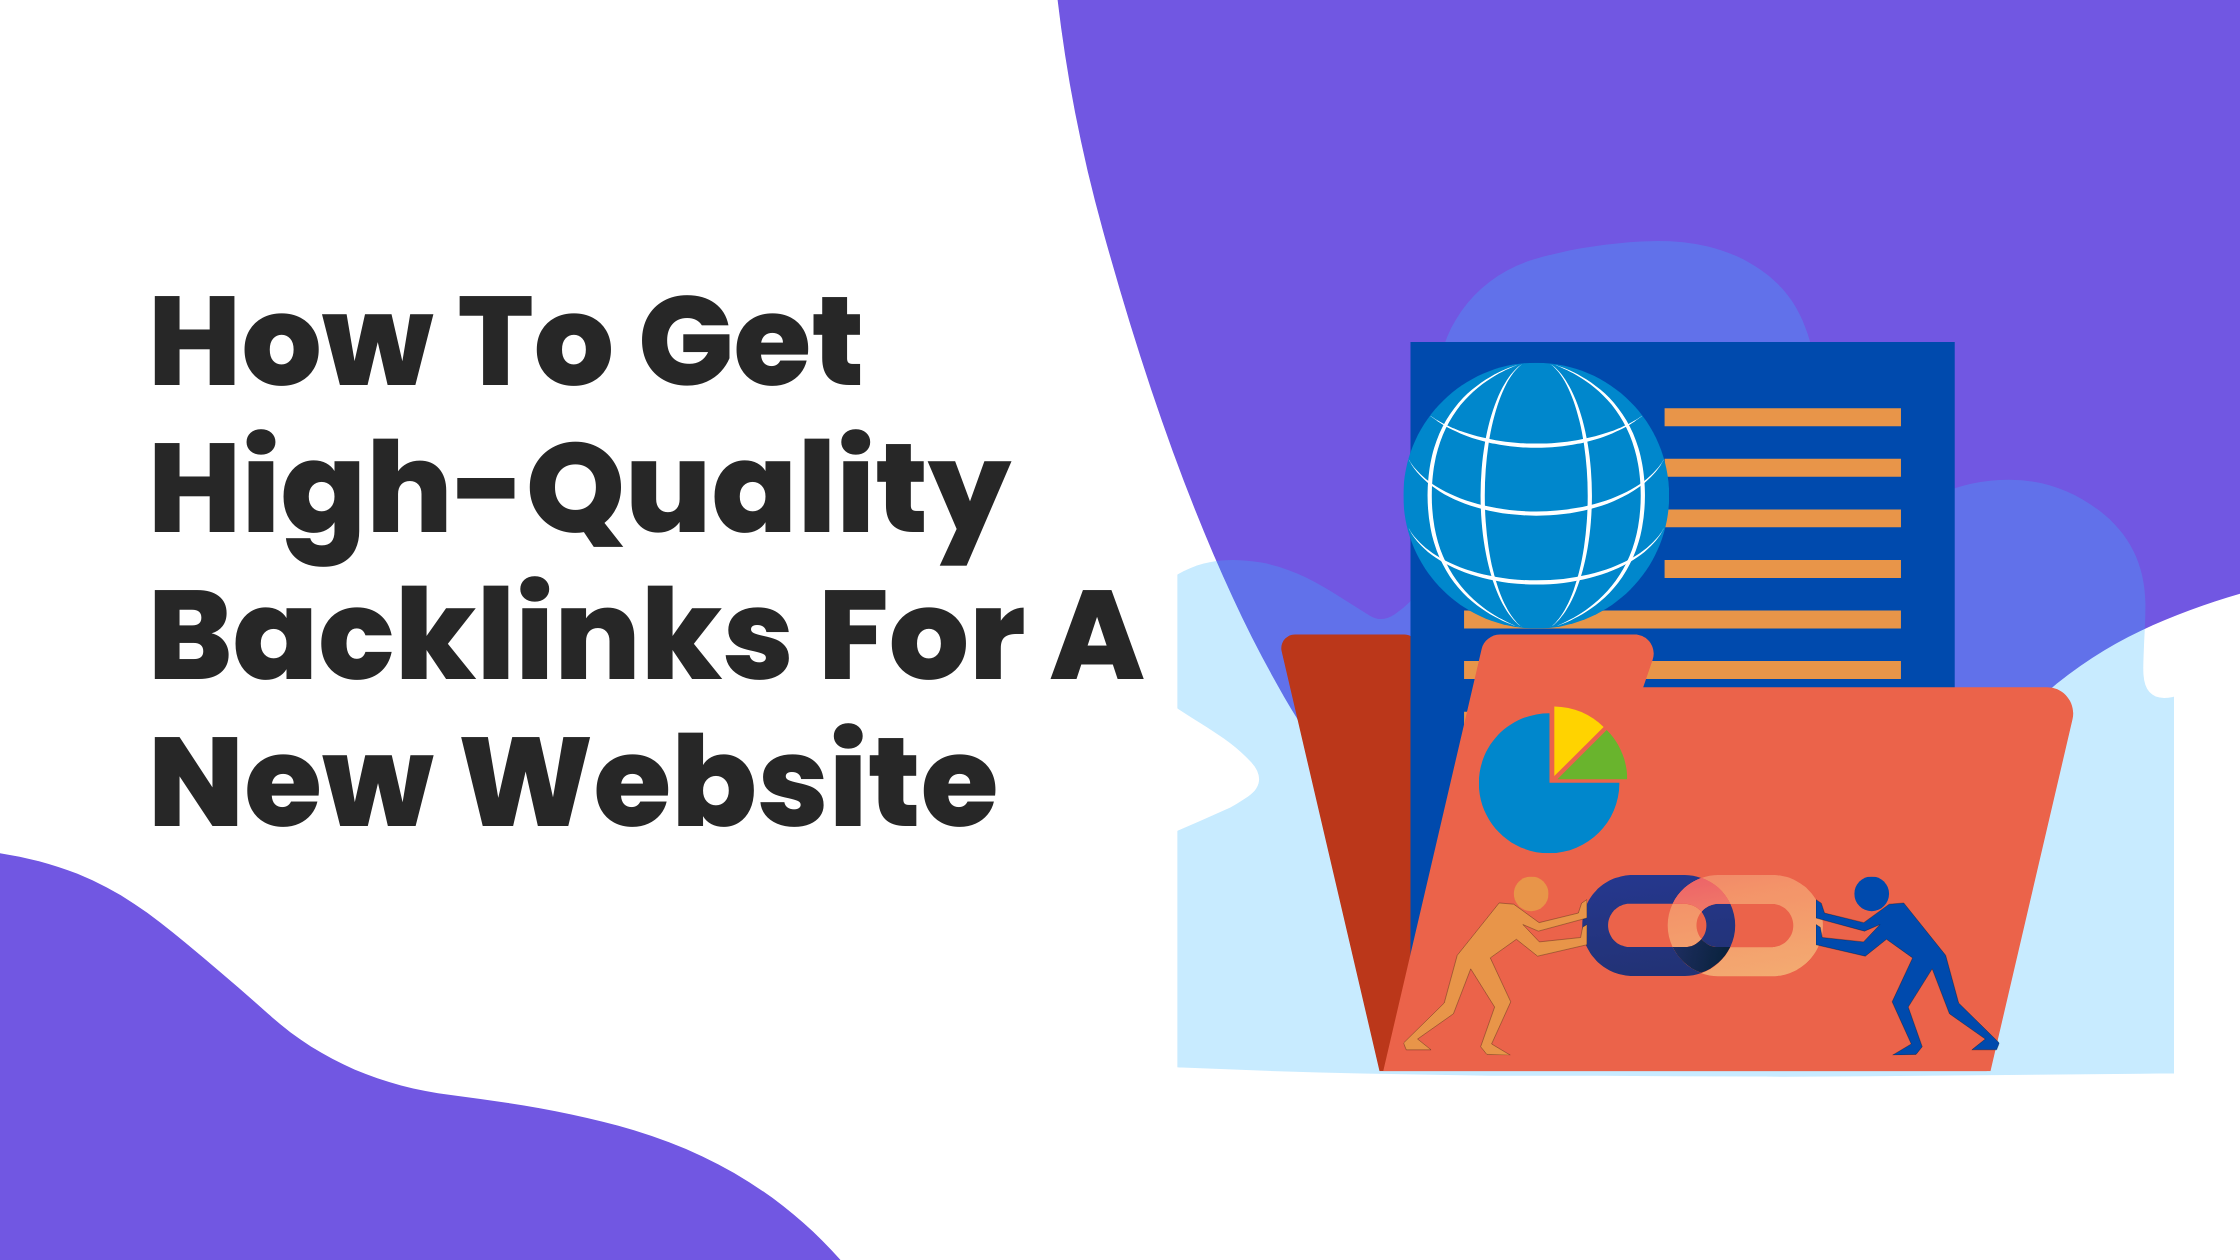 How To Get High-Quality Backlinks